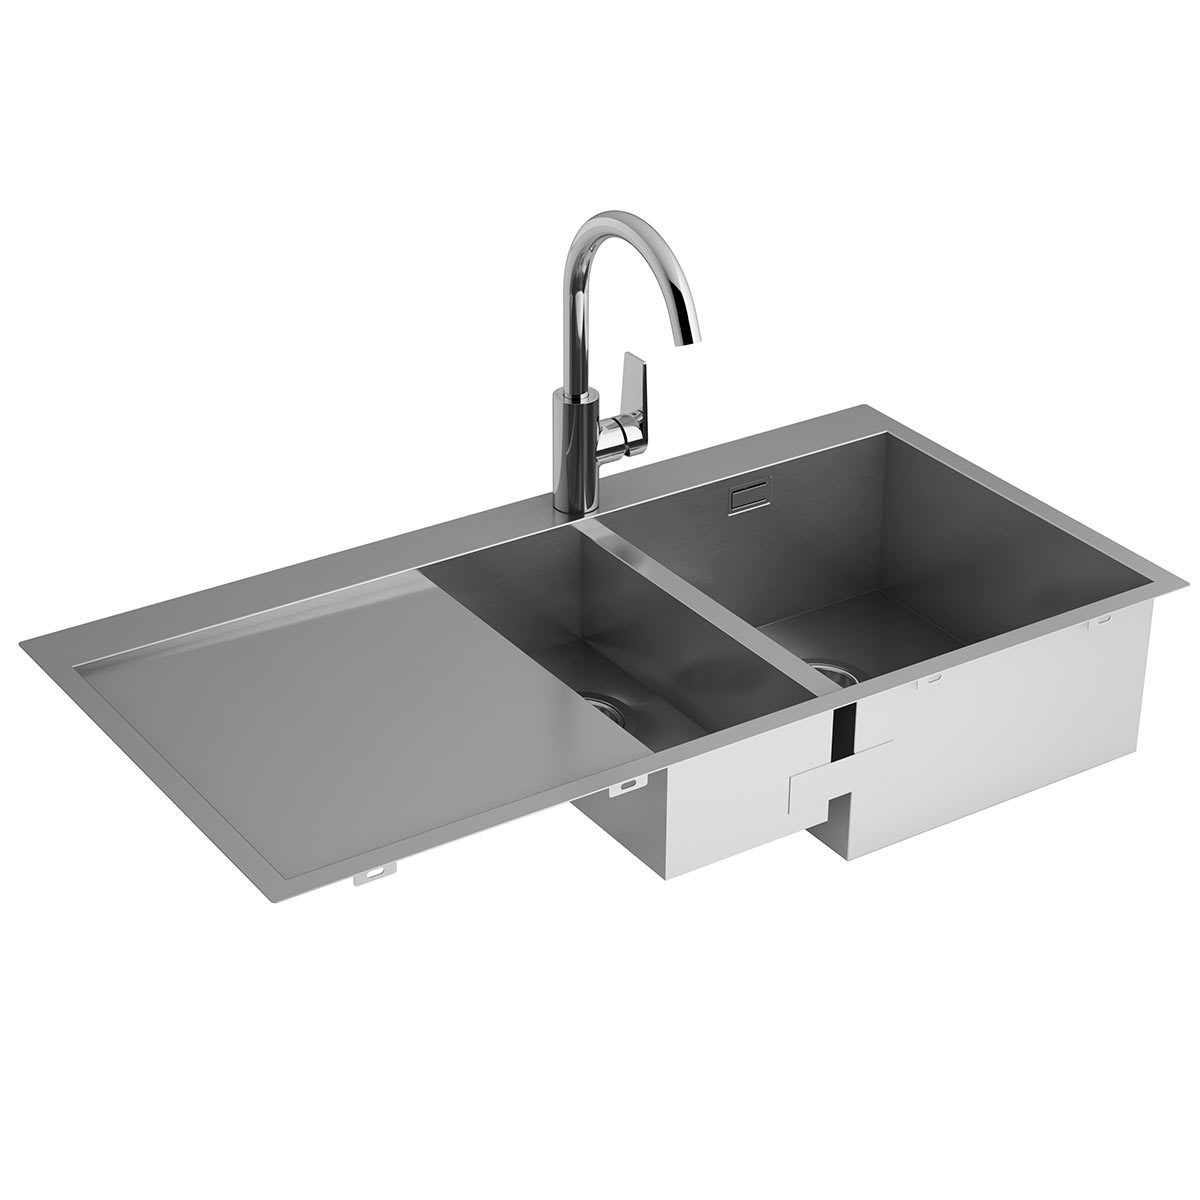 Kohler True Stainless Steel Sink With Draining Board And Taut Single Lever Mixer Tap Bundle Costco Uk